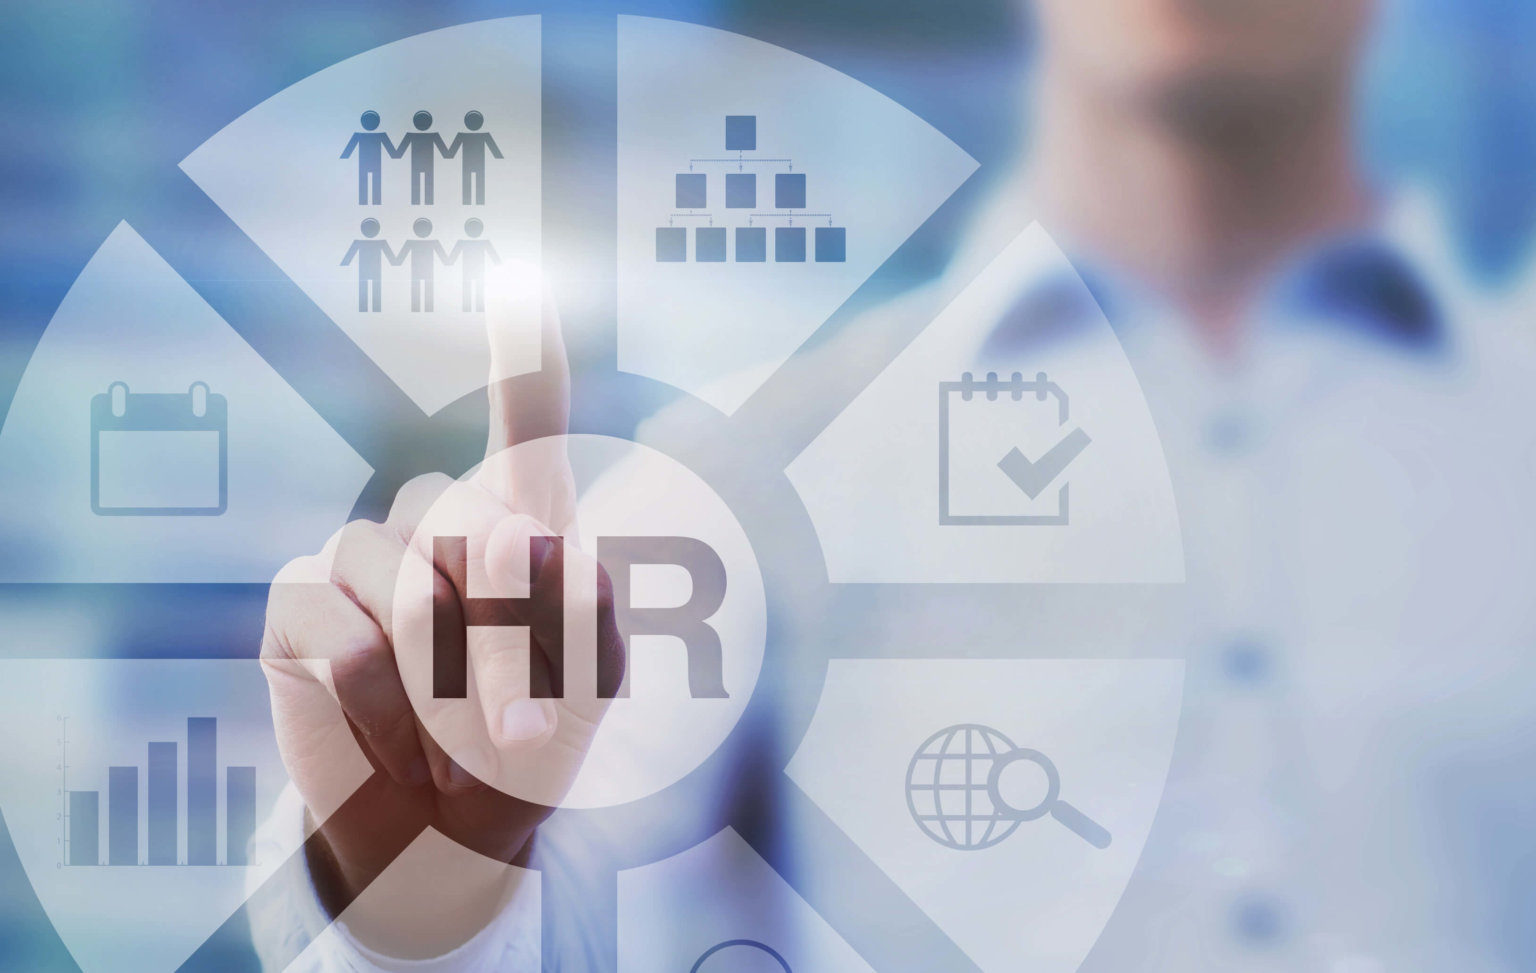 Essential modules to Look for in HR Software for Small Businesses